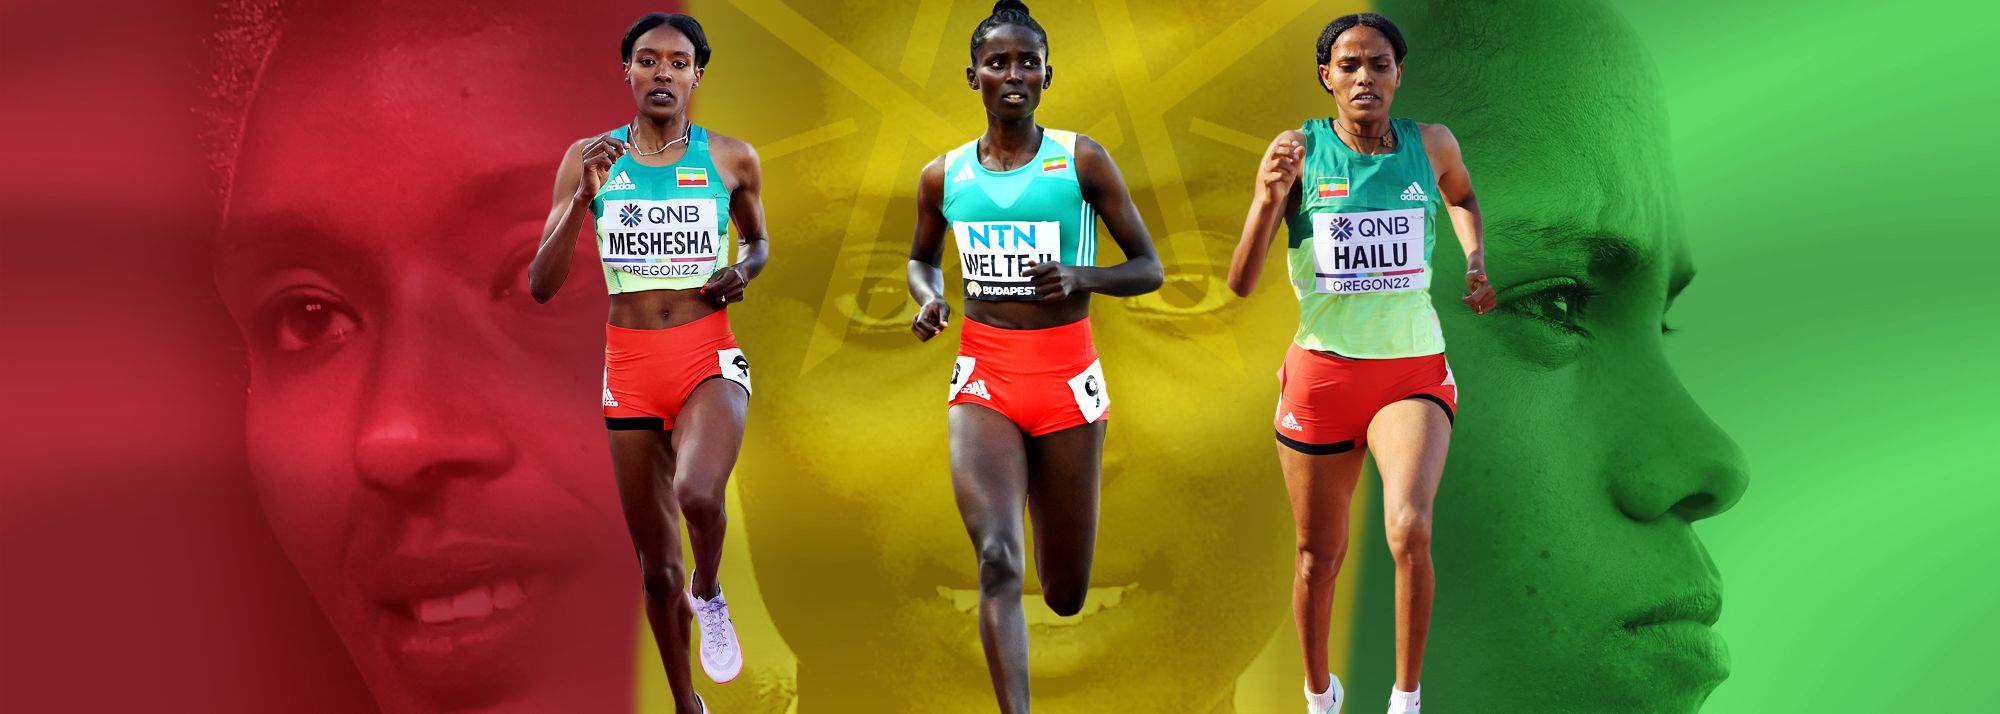 Diribe Welteji, Freweyni Hailu and Hirut Meshesha look set to do great things for Ethiopia in the middle distances